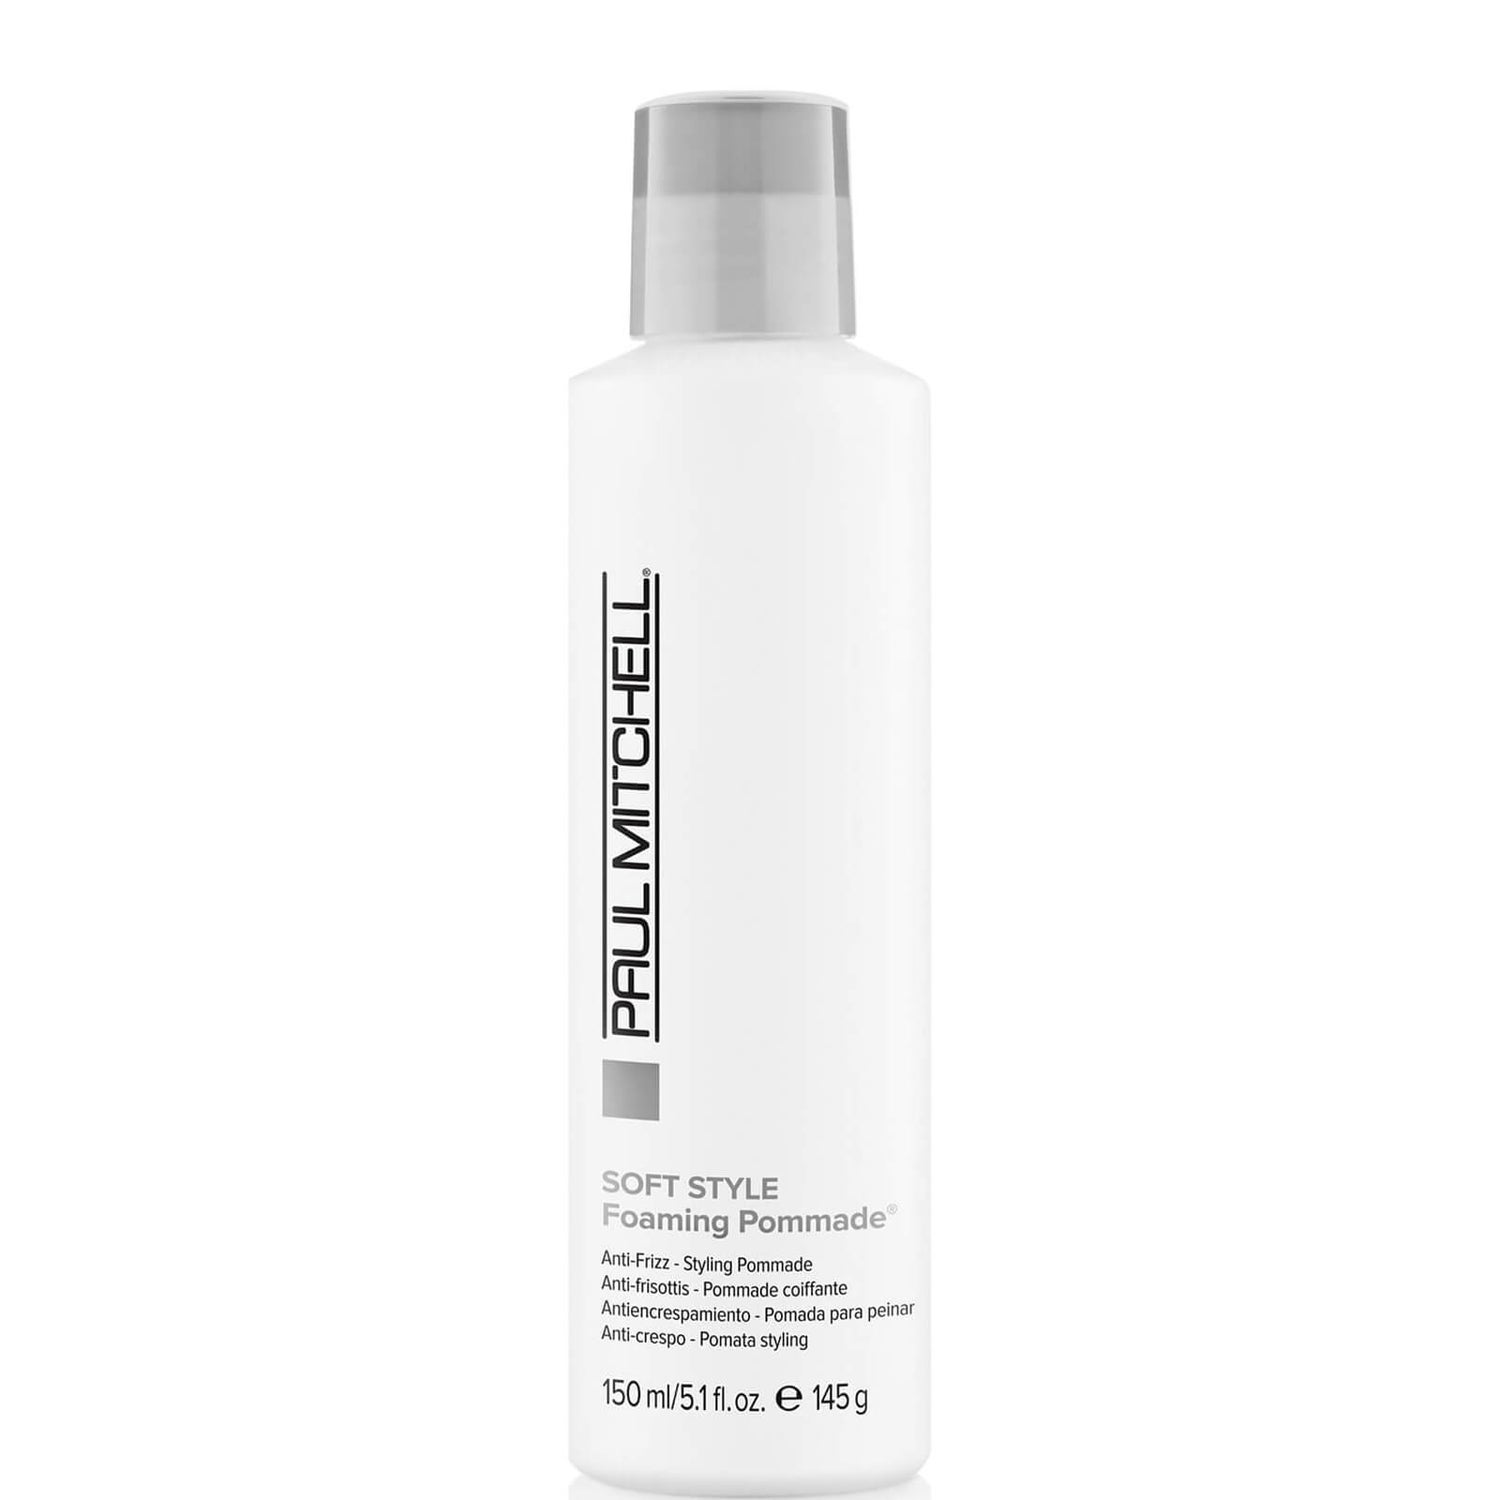 Paul Mitchell Foaming Pomade (150 ml)